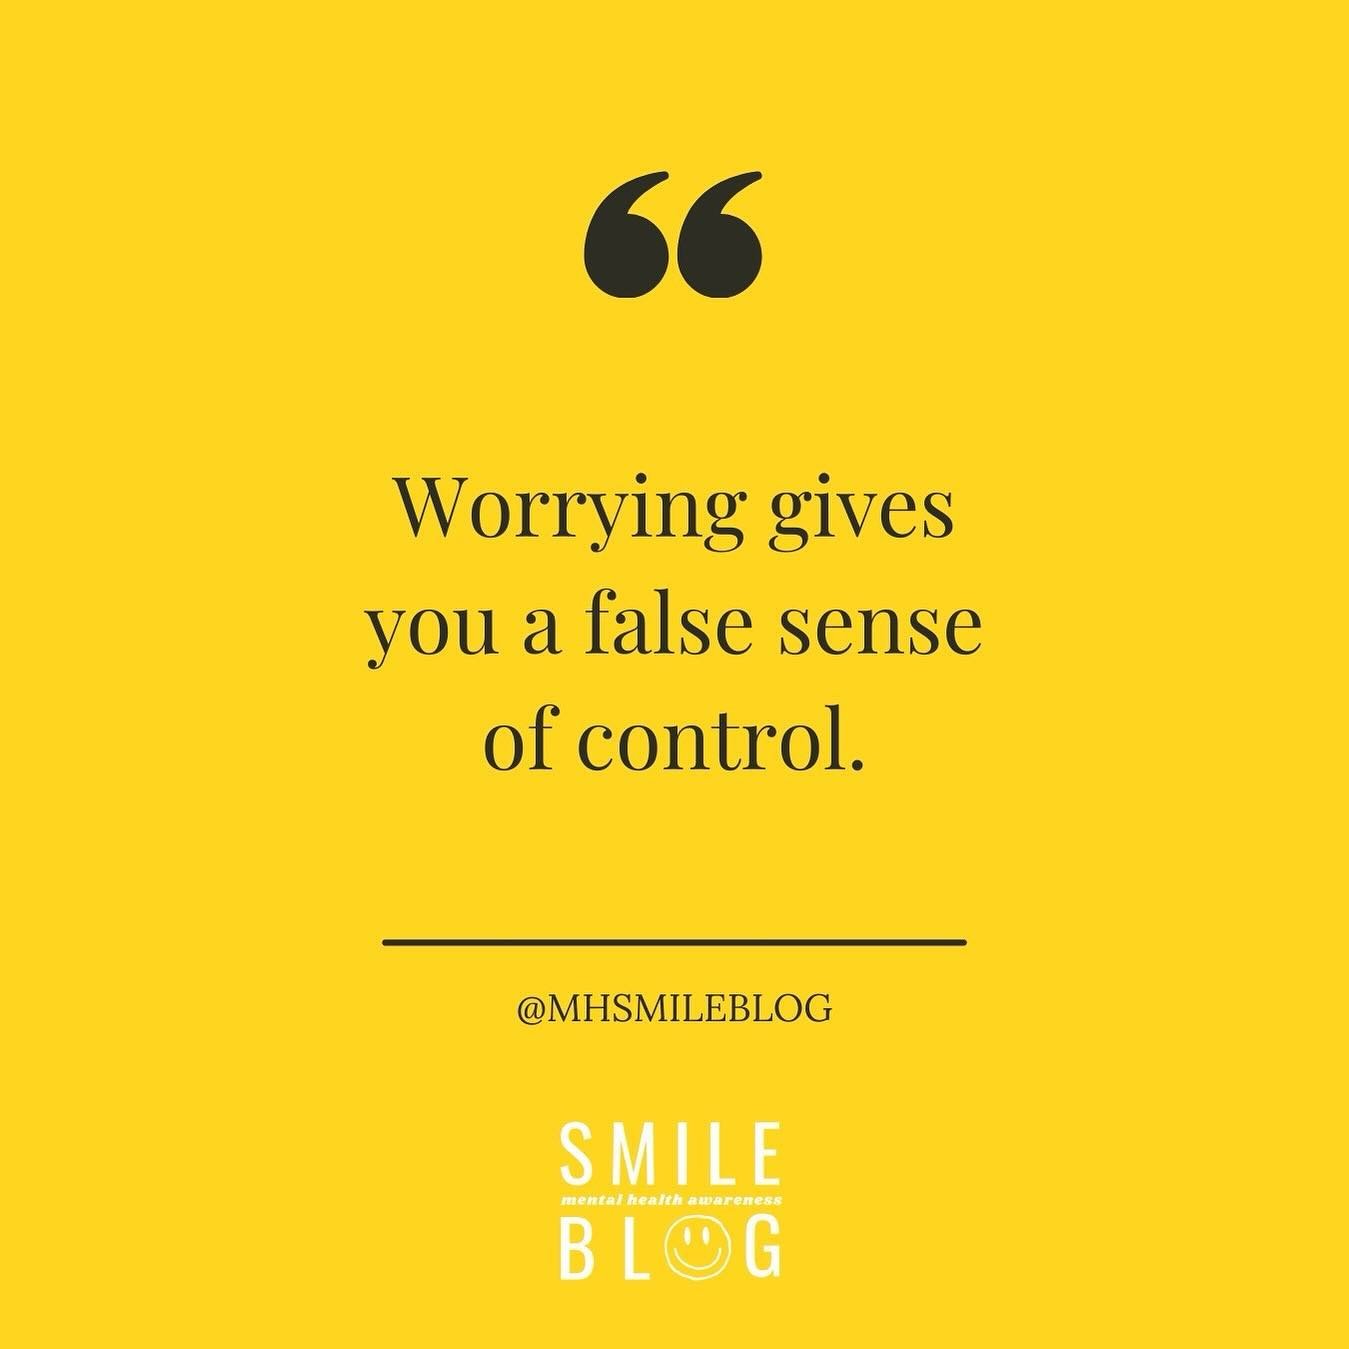 Sometimes worrying too much about something can be unproductive because you don&rsquo;t have control over what&rsquo;s going to happen. In a way, worrying makes sense as it can pull us in to a false sense of control as we&rsquo;re doing &ldquo;someth